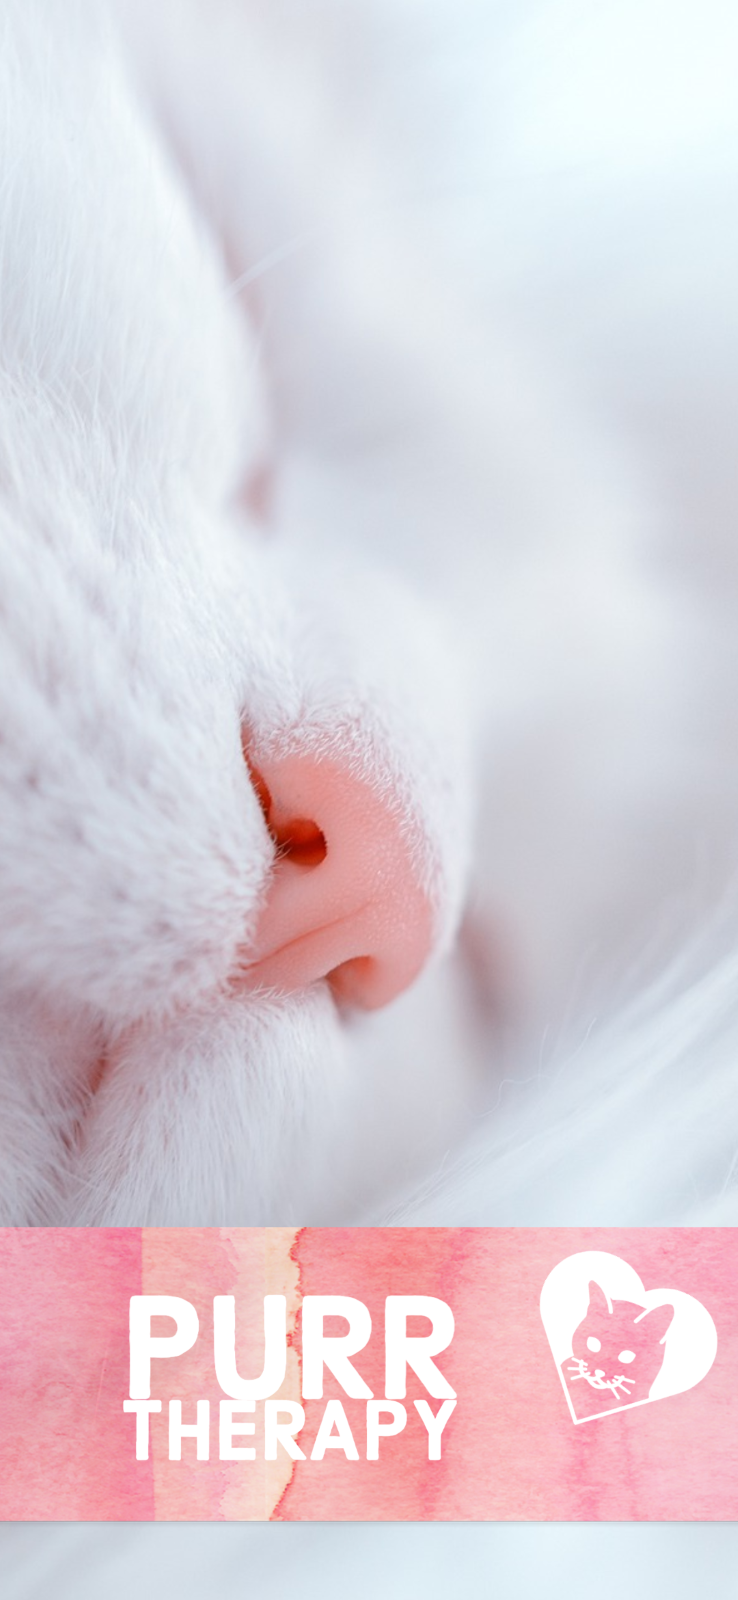 "Purr therapy" Snapchat Geofiler with a close up of a white cat with a light-pink nose and a graphic of a cat surrounded by a heart